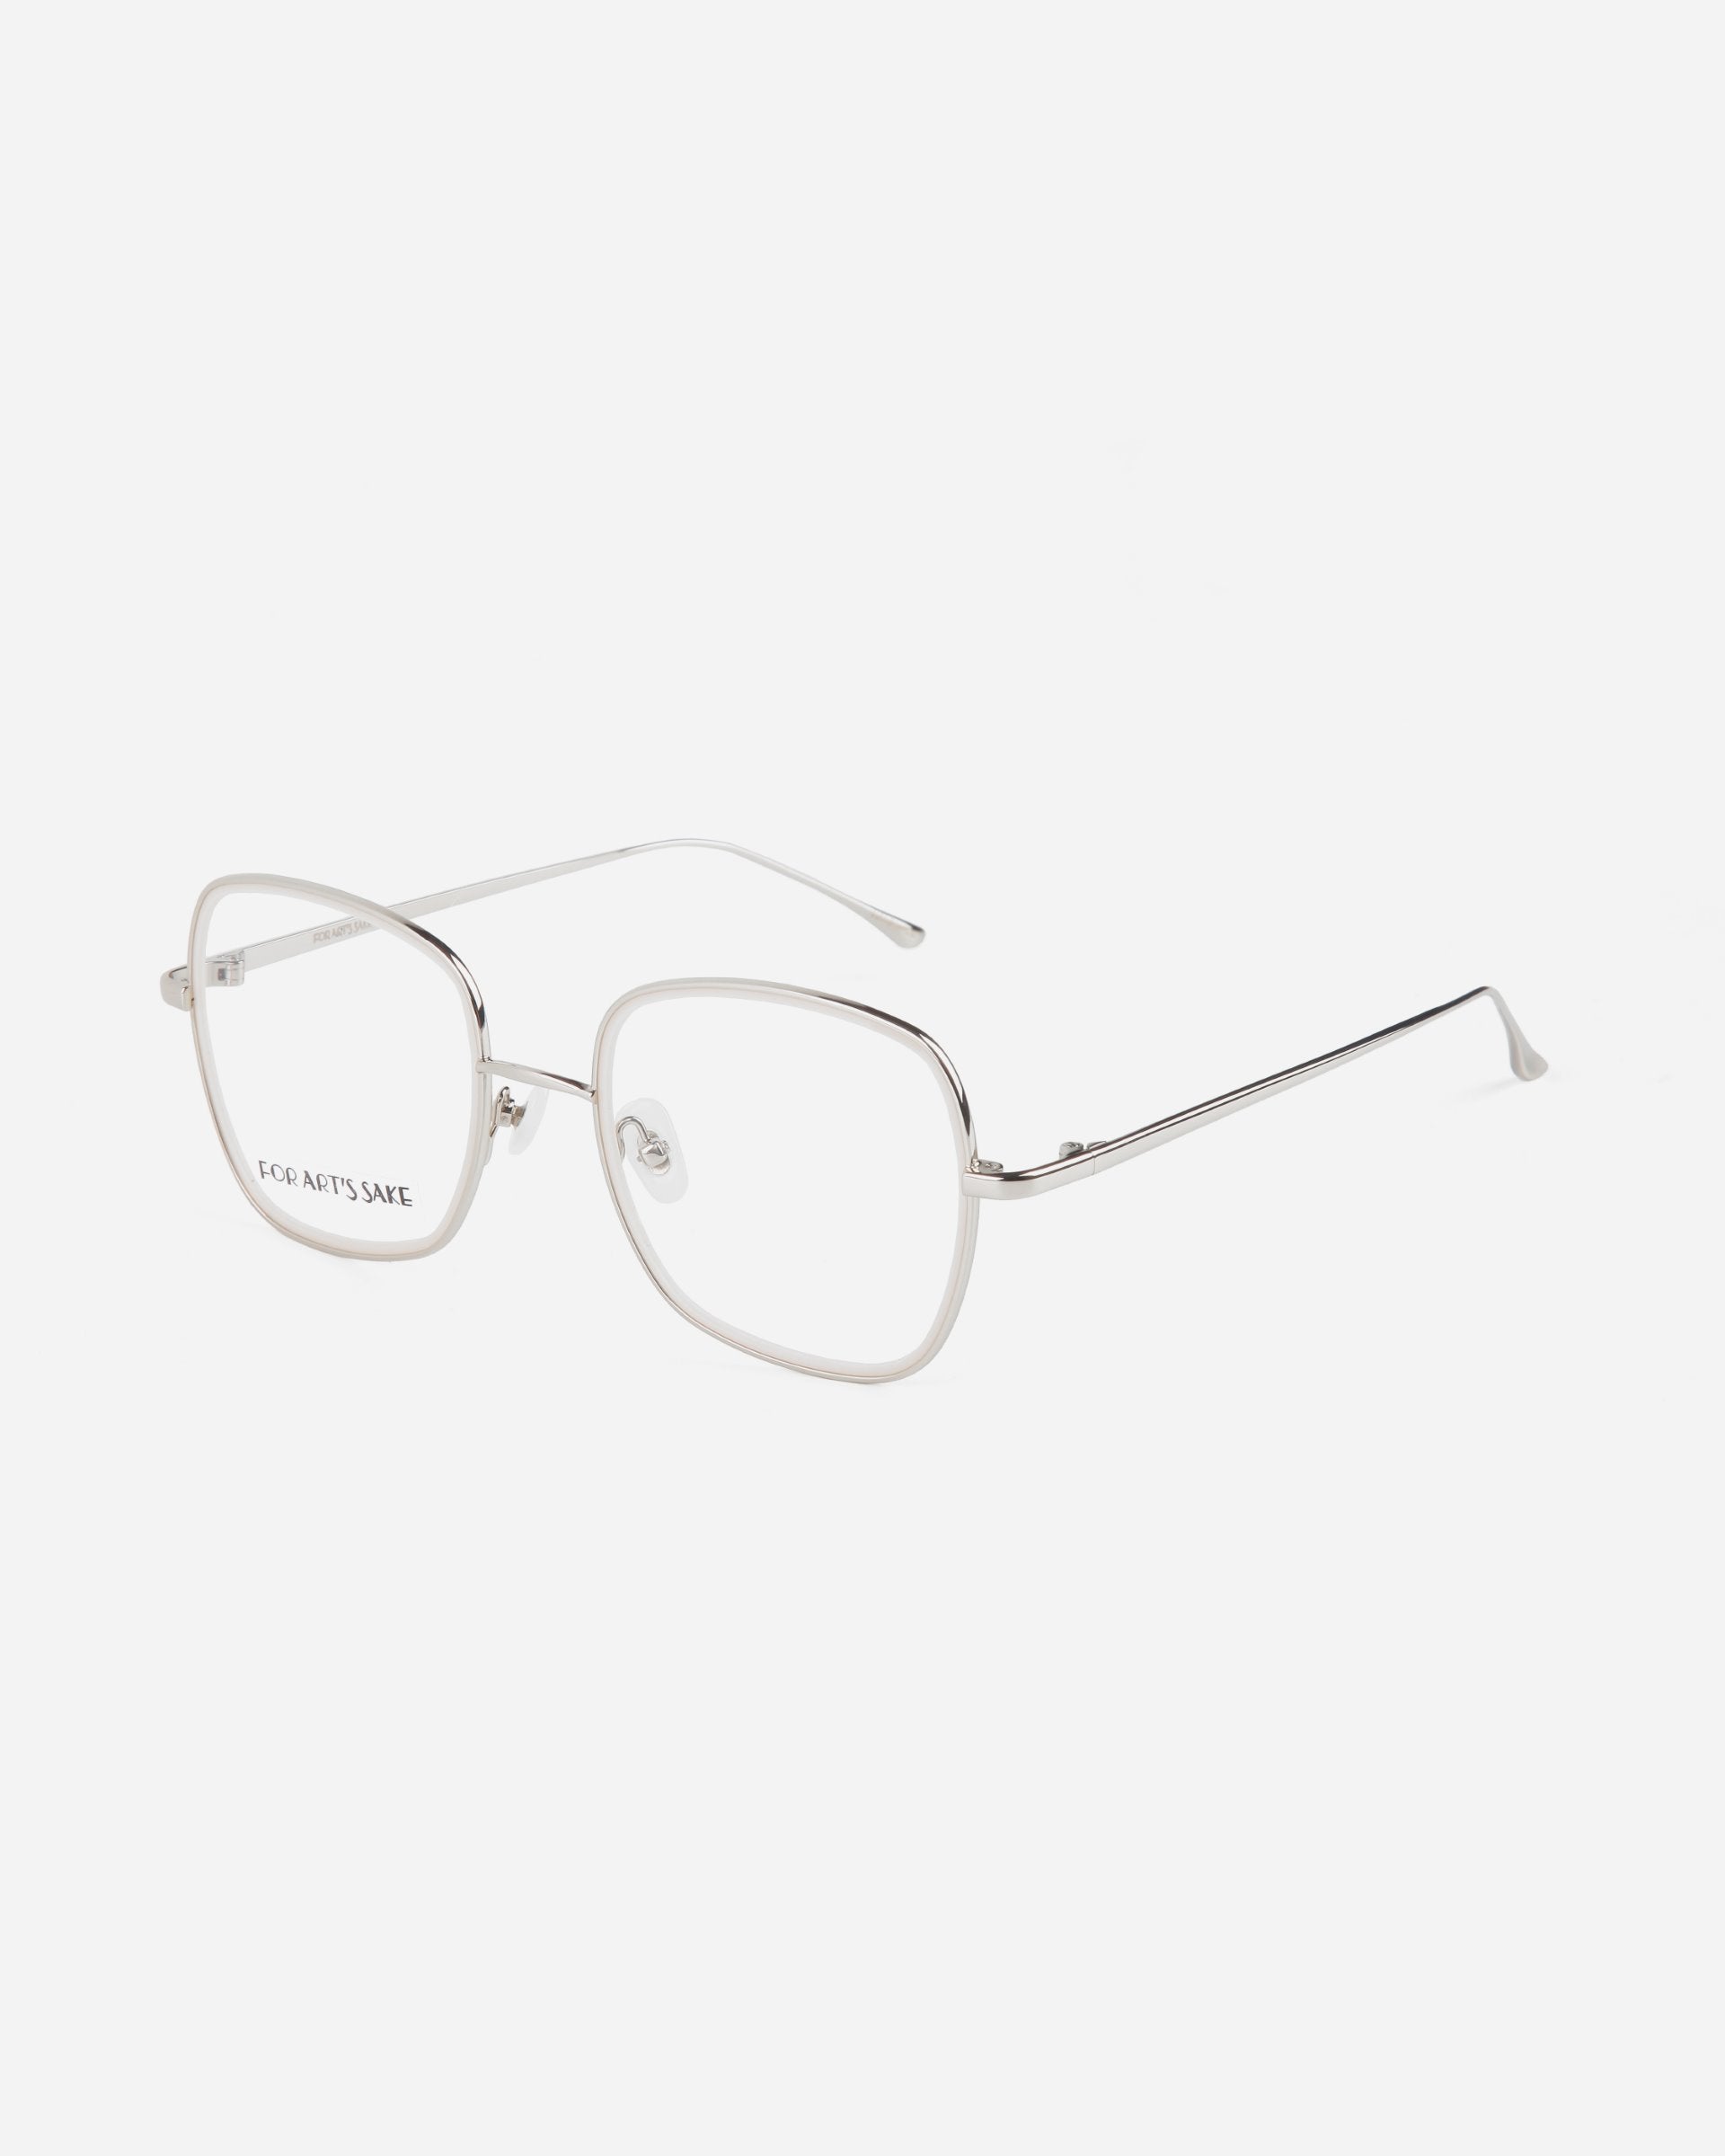 A pair of rectangular, thin, silver-framed Coconut eyeglasses from For Art&#39;s Sake® with clear, ultra-lightweight lenses. The left lens has text that reads &quot;ECO ARTS SAVE.&quot; The glasses are viewed at an angle against a white background.